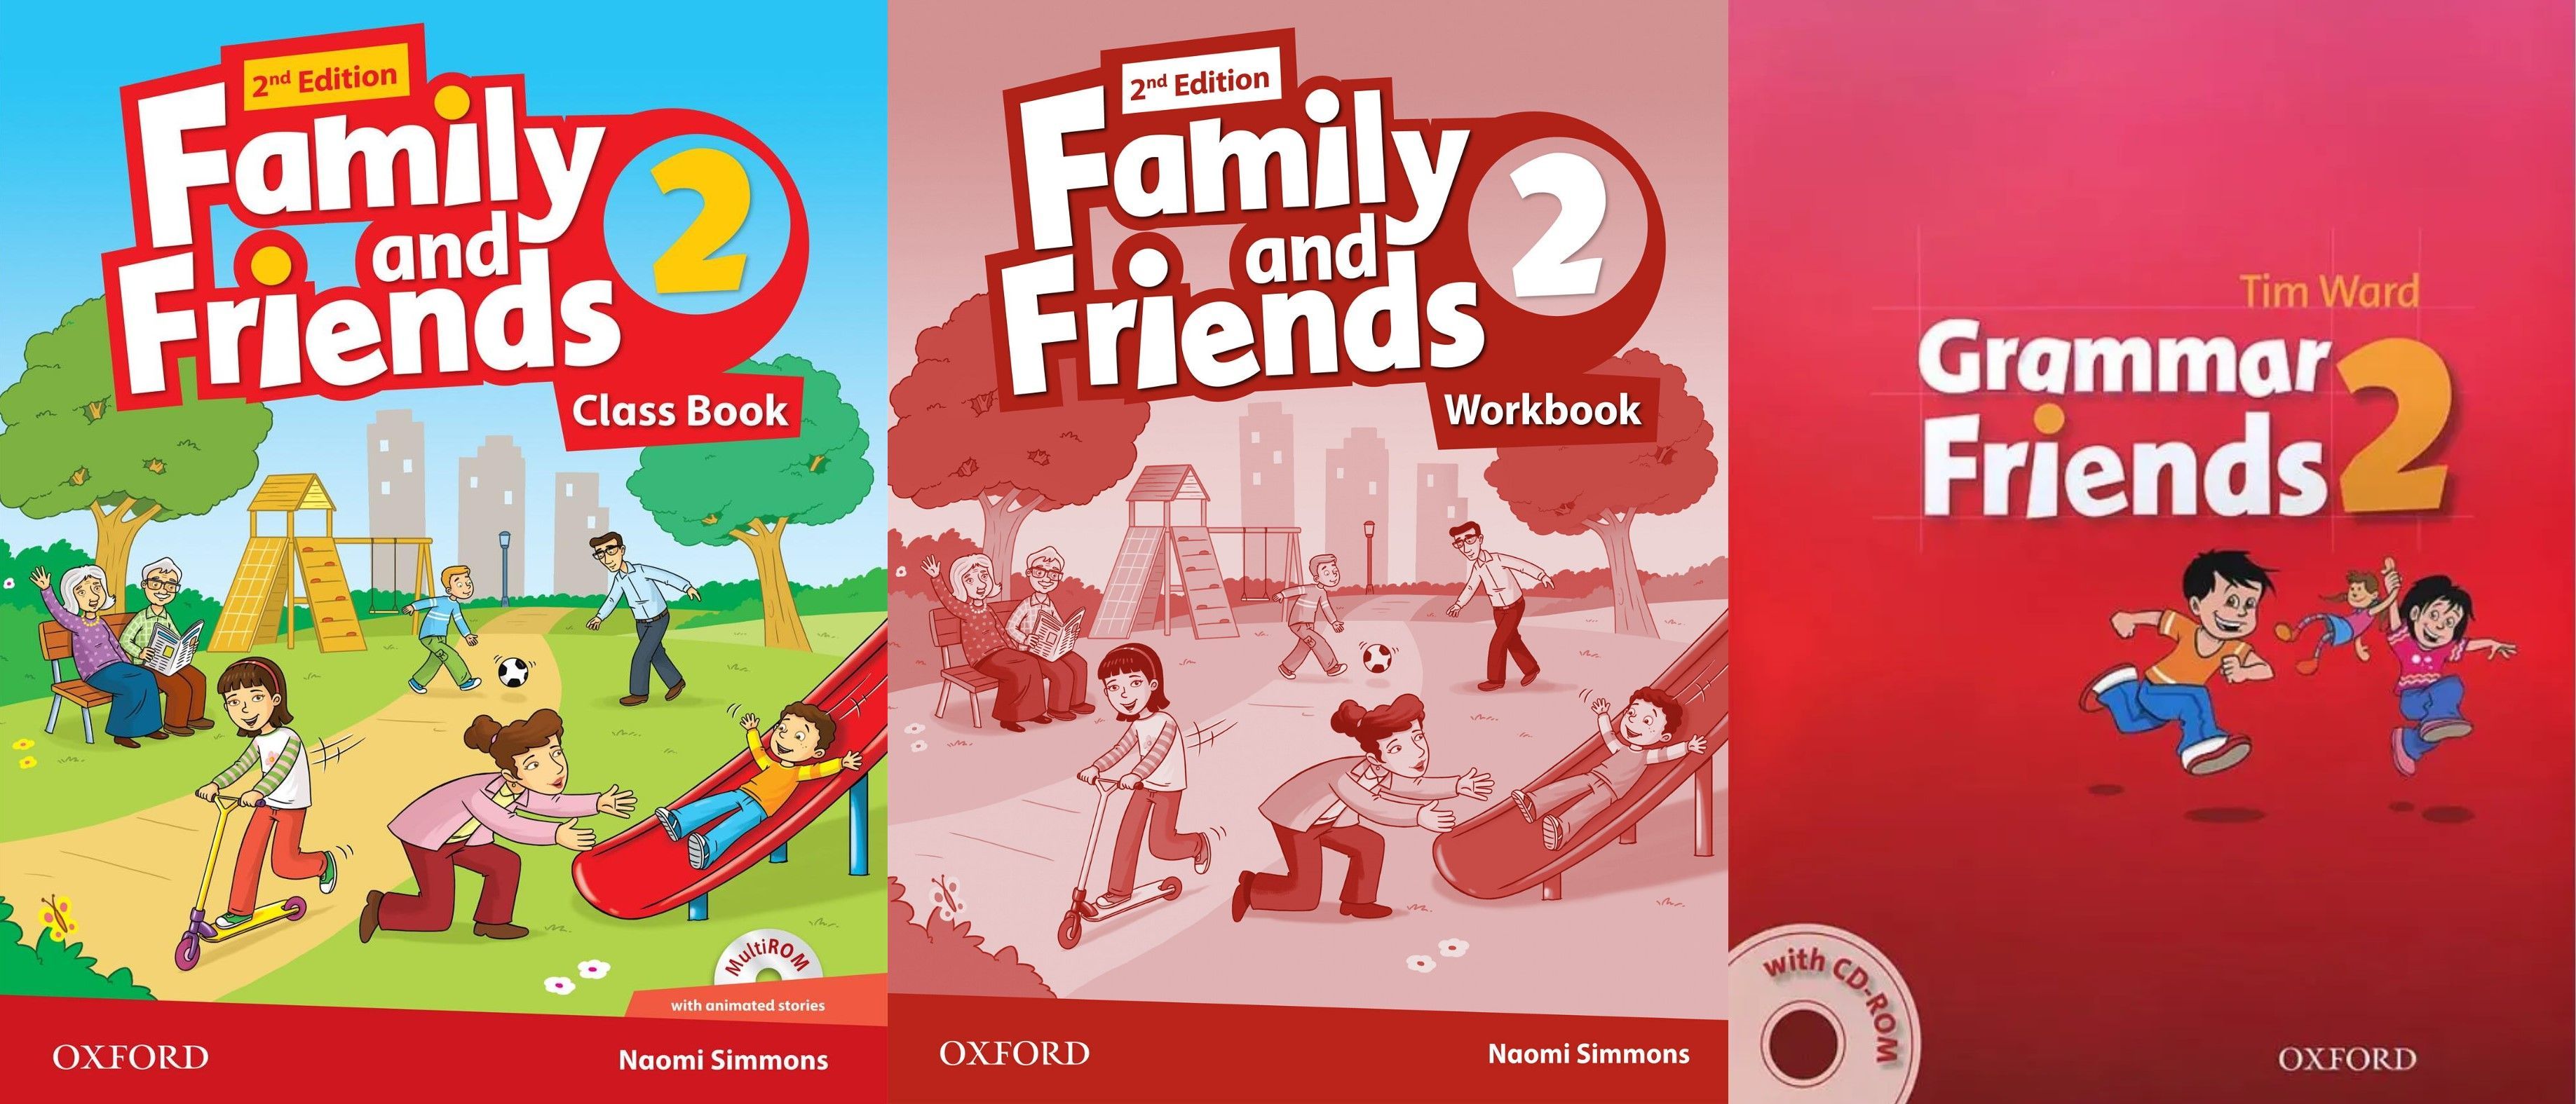 Books and friends. Английский язык Family and friends class book 2. Книга Family and friends 2. \Фэмили энд френдс 2 издание. Английский Family and friends 2 class book.